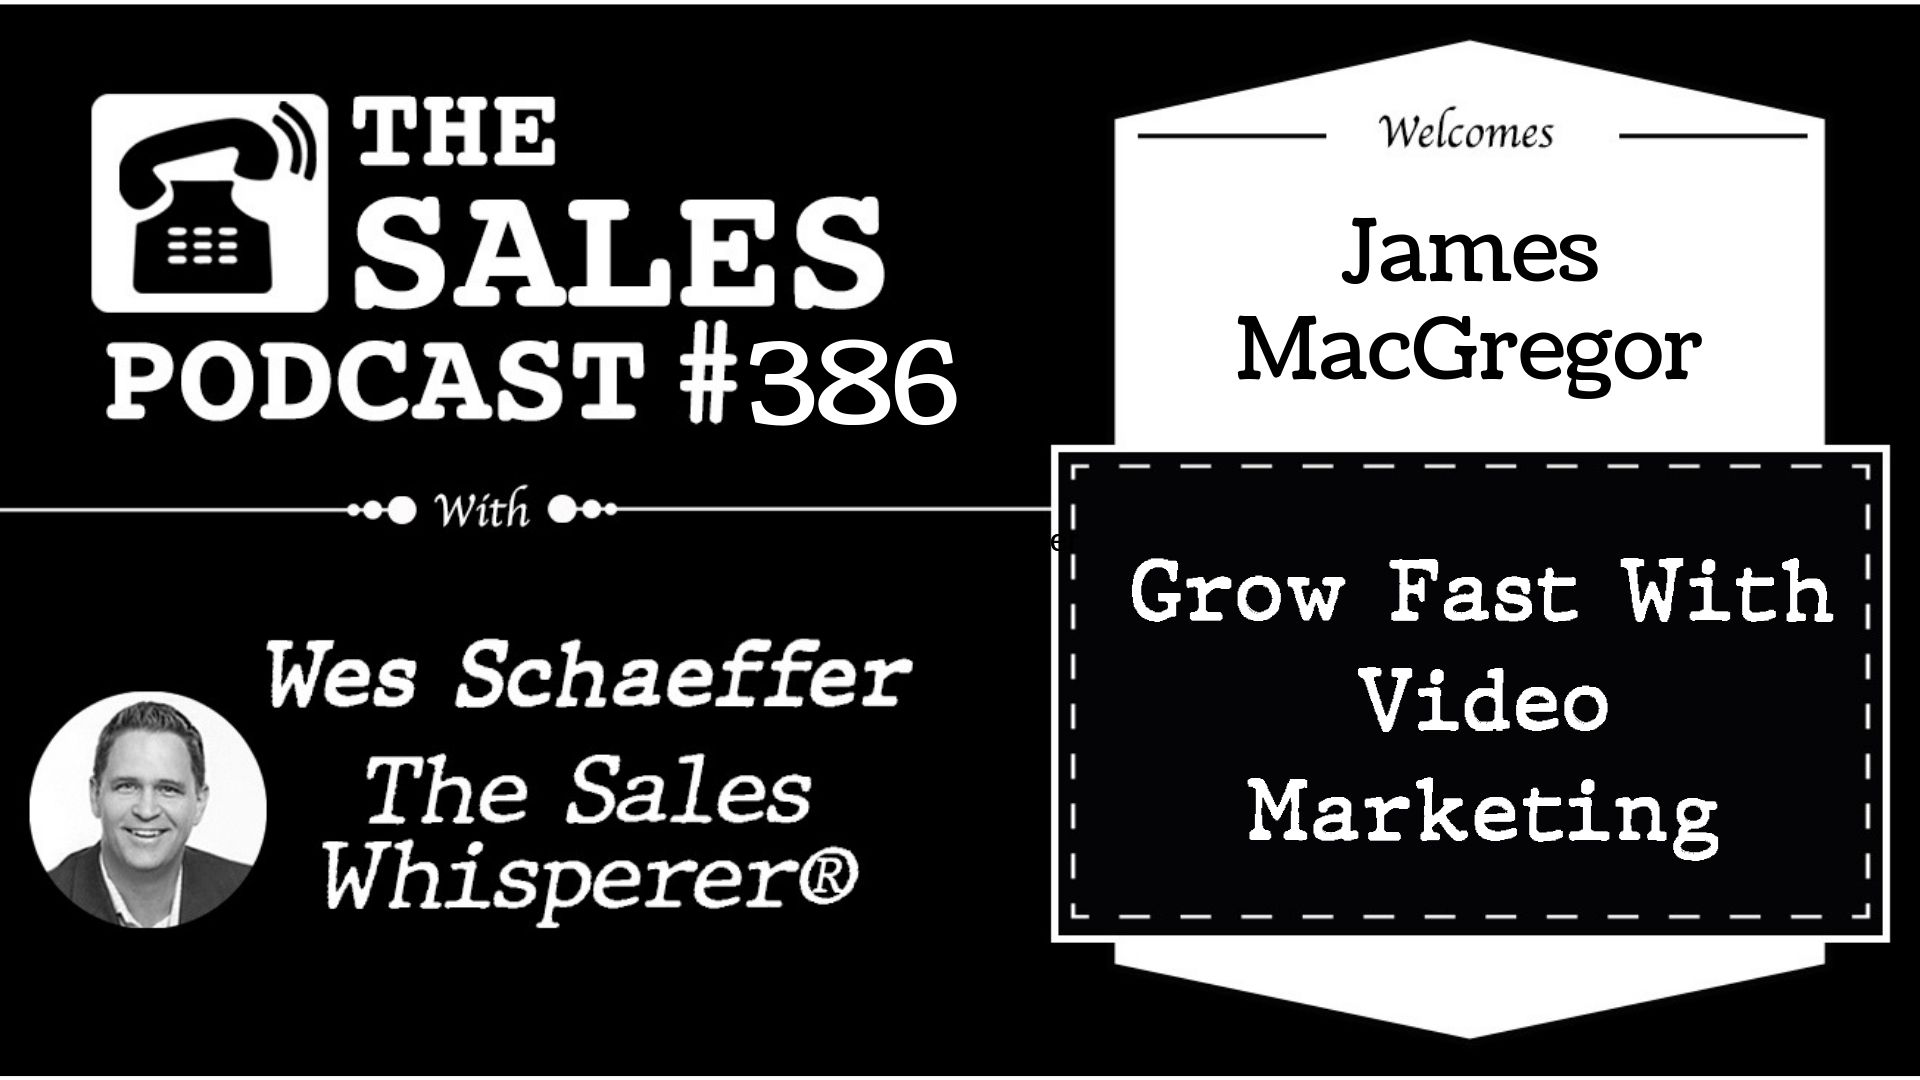 James MacGregor Landed 4.4 Million New Users In Under 5 Years